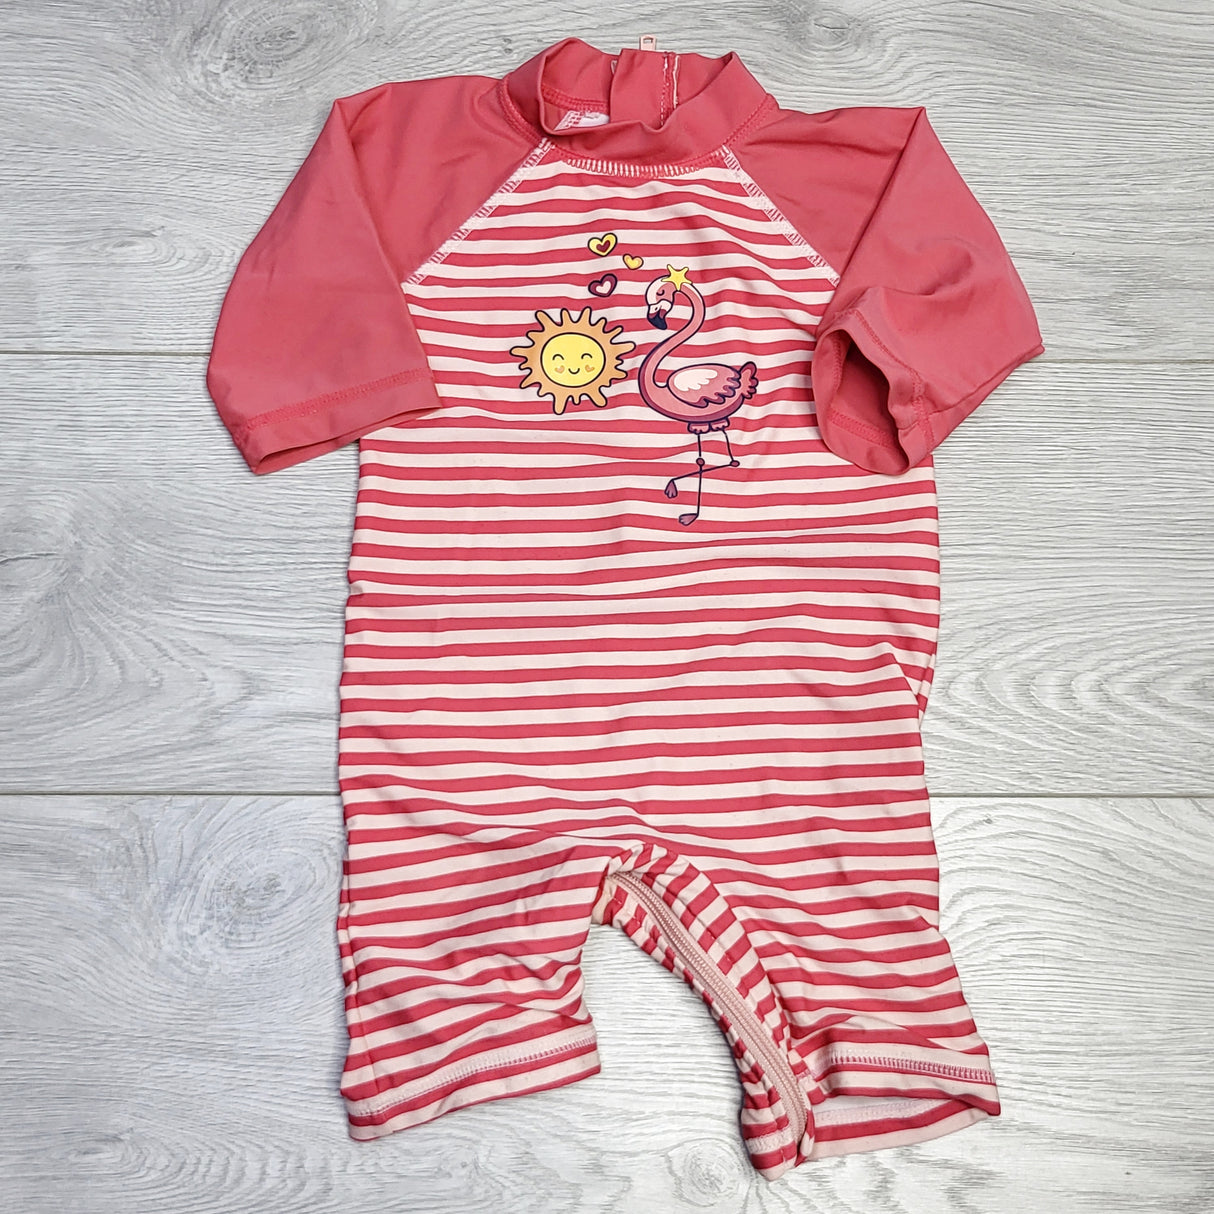 MSNDS1 - Five Oceans pink striped one piee rash guard. Size 18 months